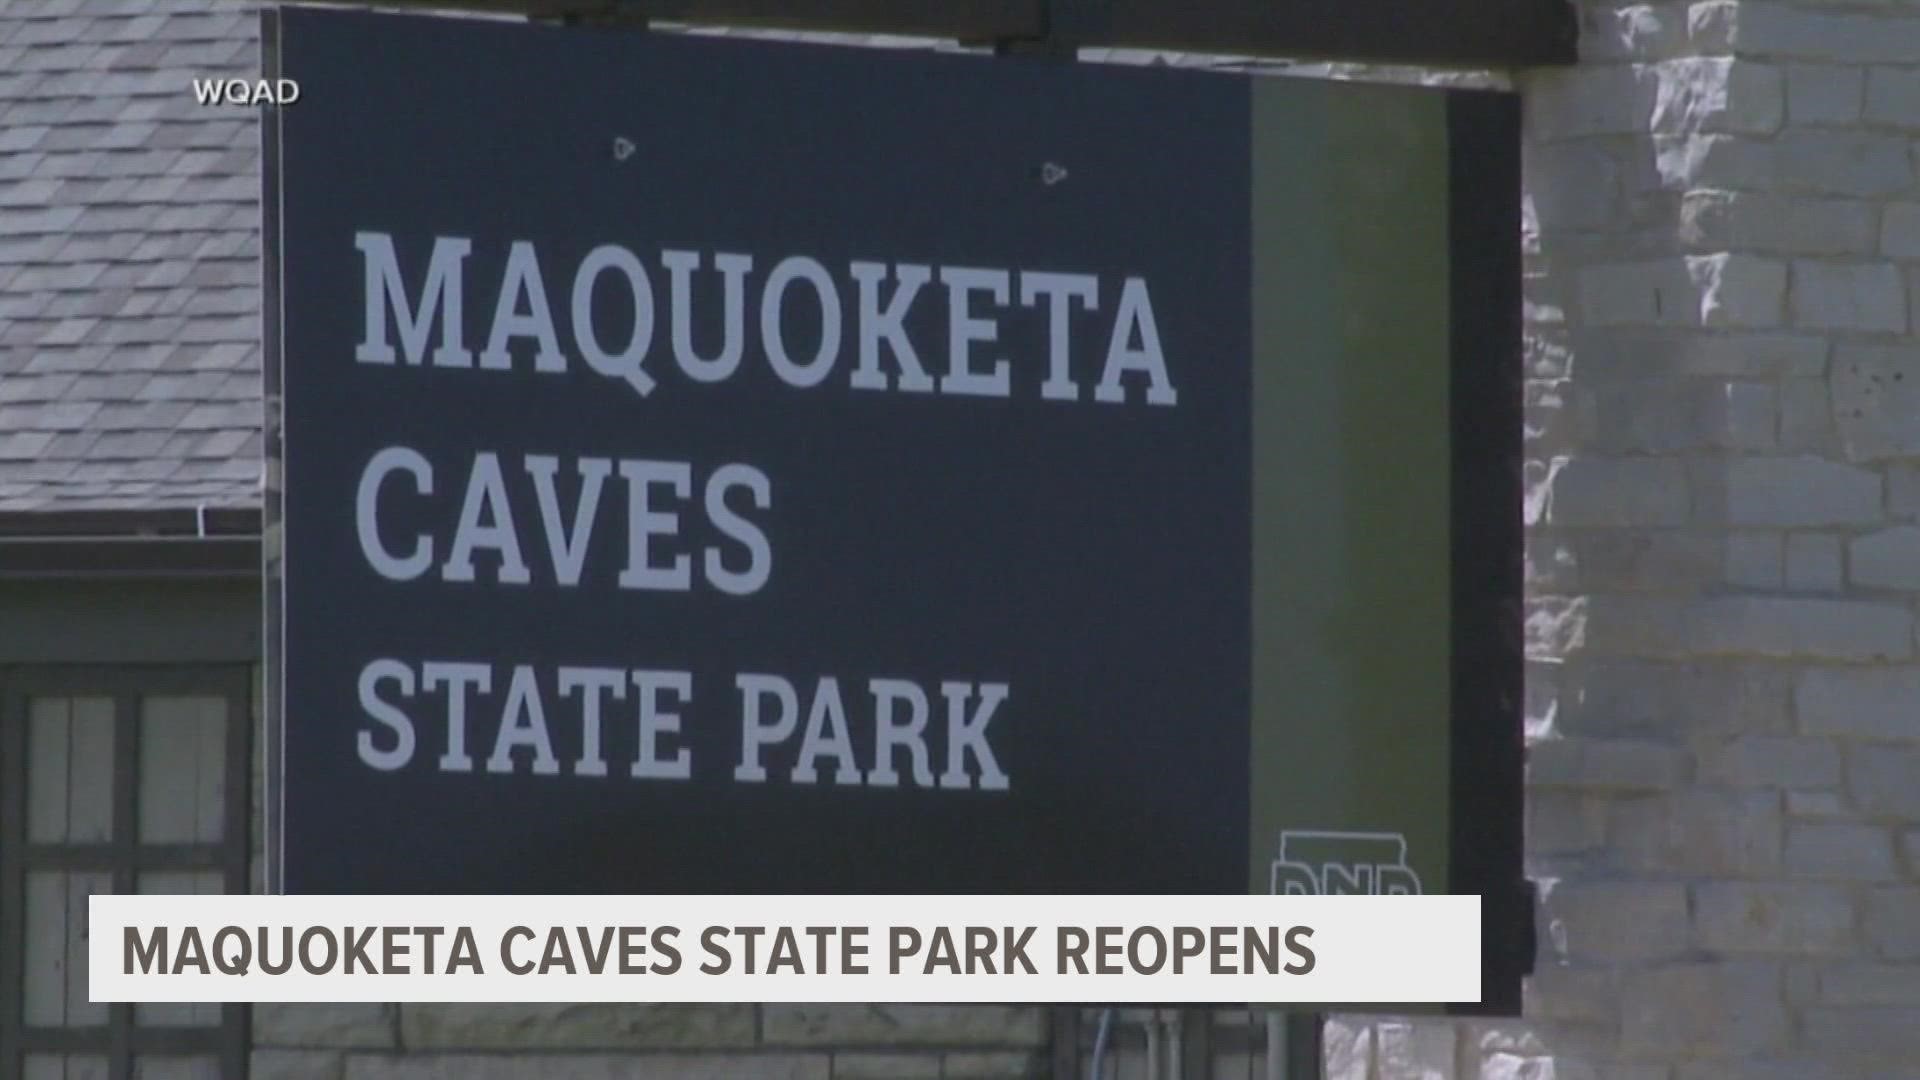 The state park is opening back up for day use just six days after the fatal shooting of a Cedar Falls family. However, the campground will remain closed.